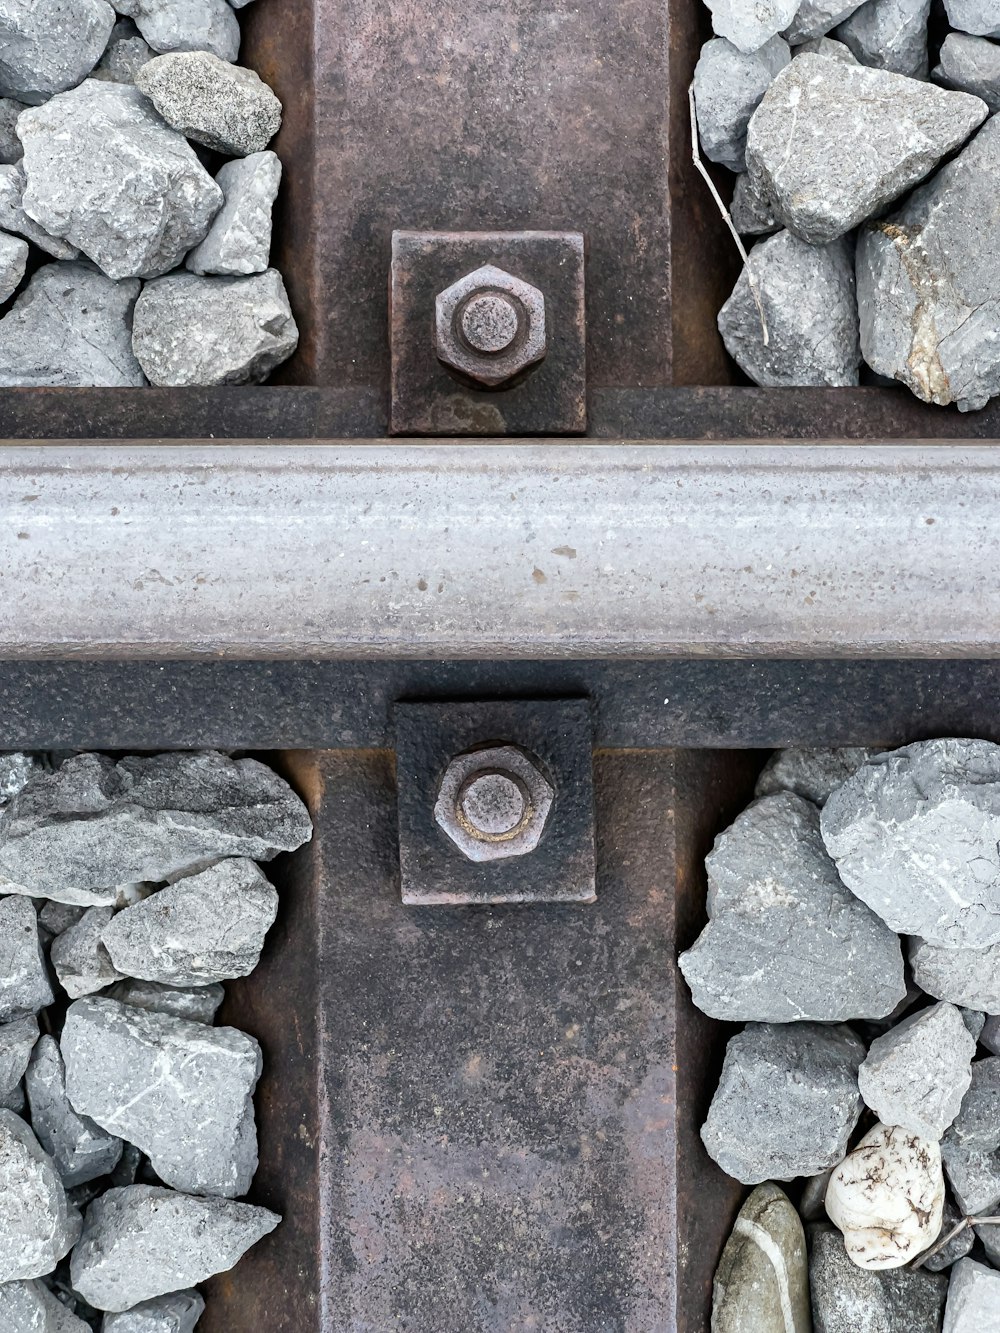 a close up of a train track with rocks